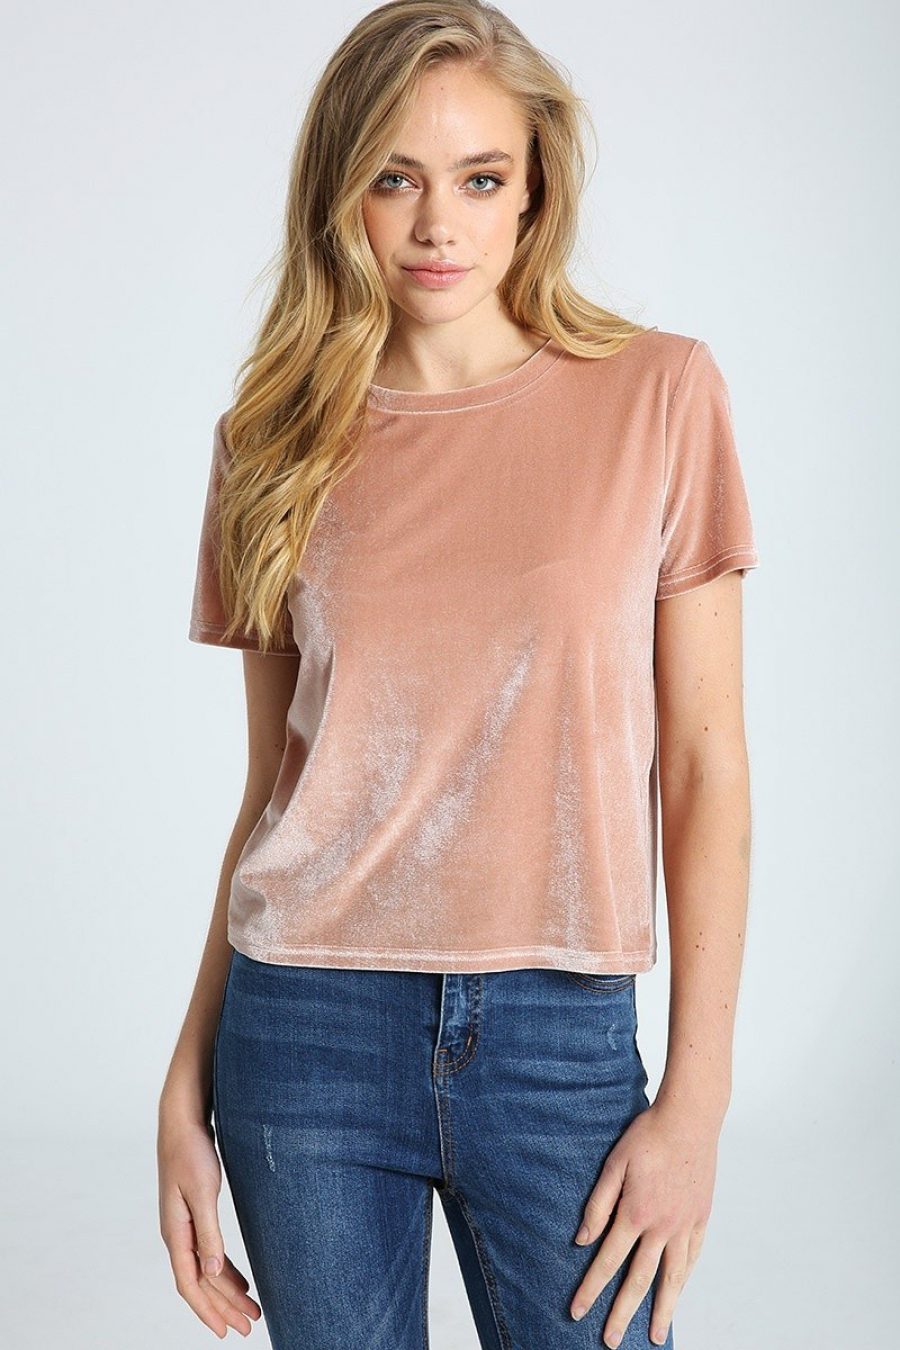 See Need Want Fashion Trend Velvet Tee